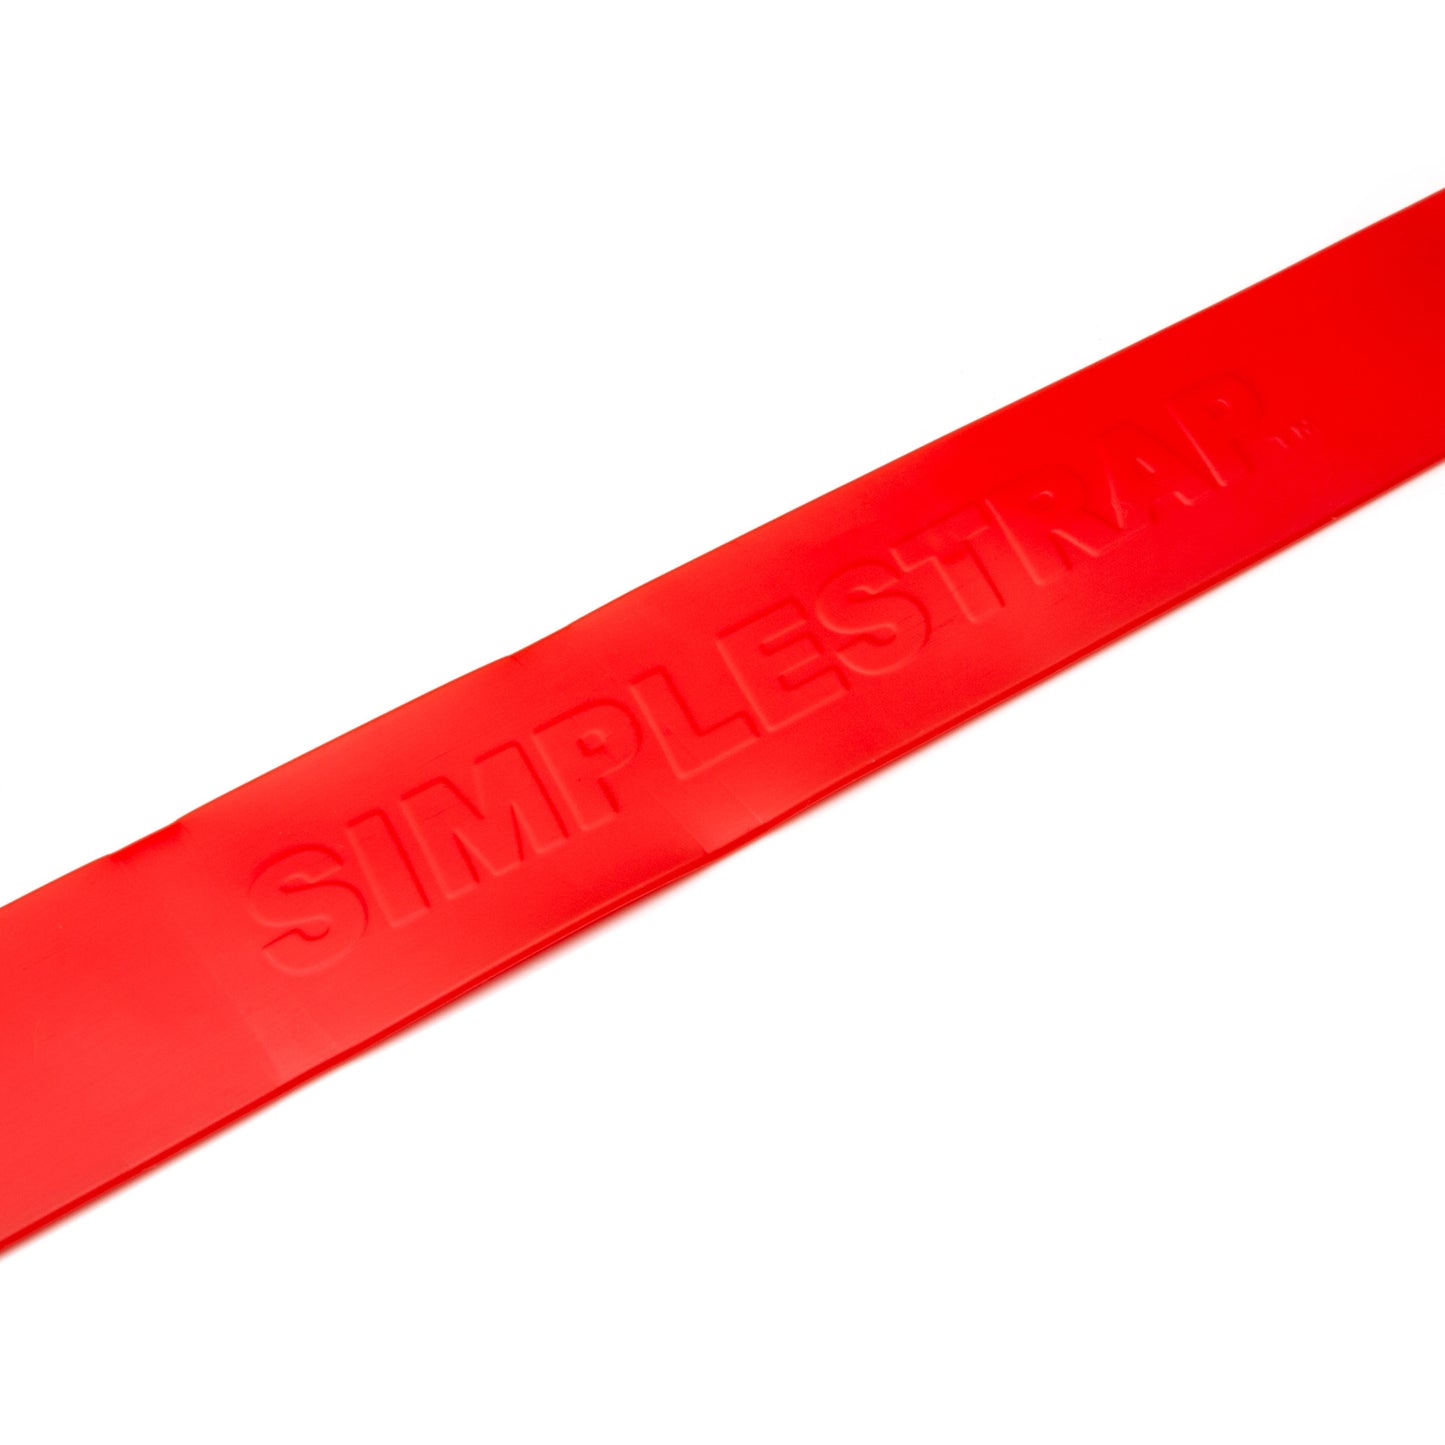 Self-Gripping UV Resistant 2mm Thick Rubber Tie Down Straps, Patriotic Red, White, and Blue 3-Pack